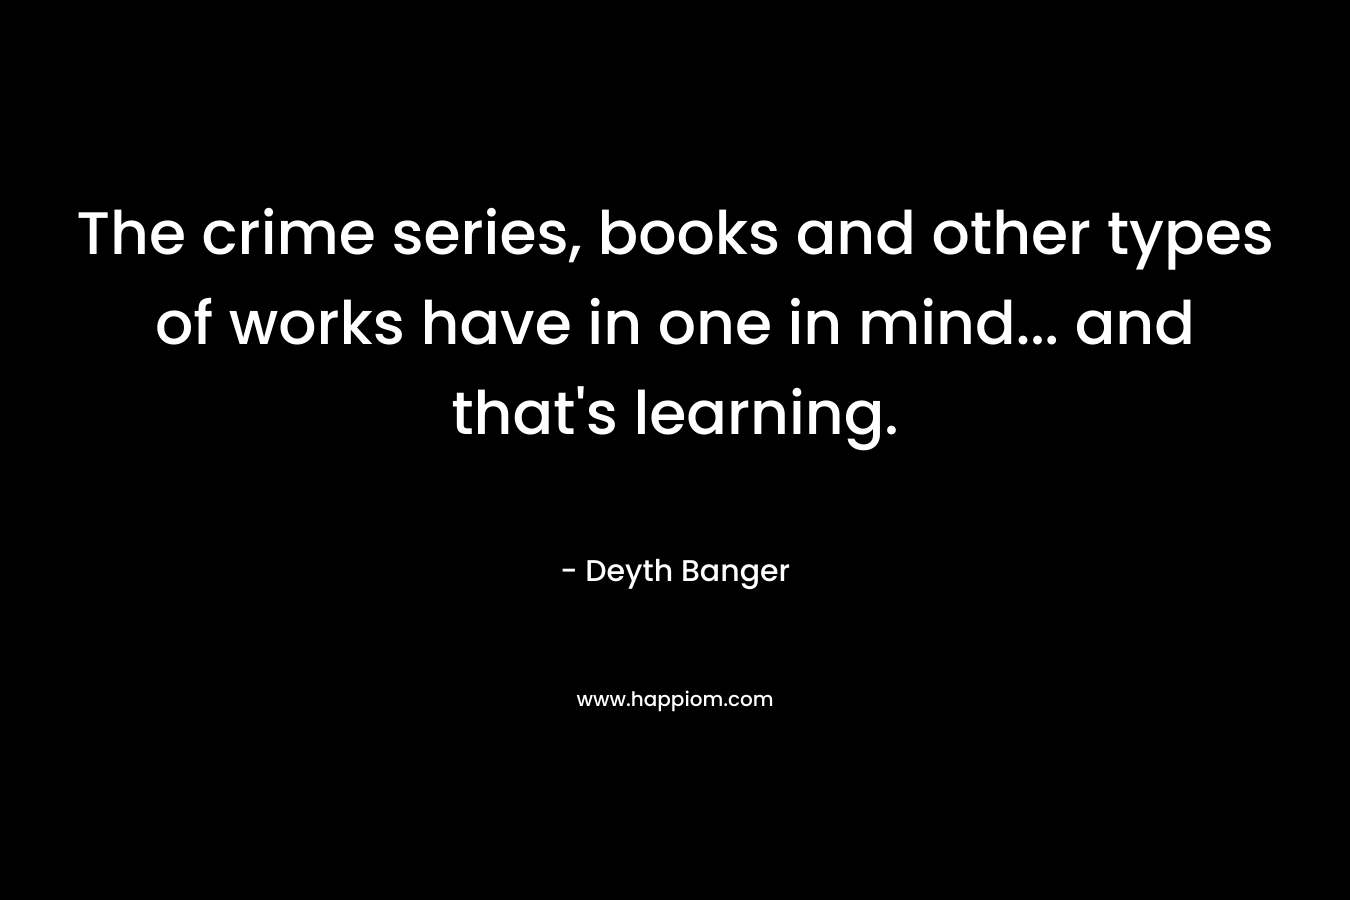 The crime series, books and other types of works have in one in mind... and that's learning.